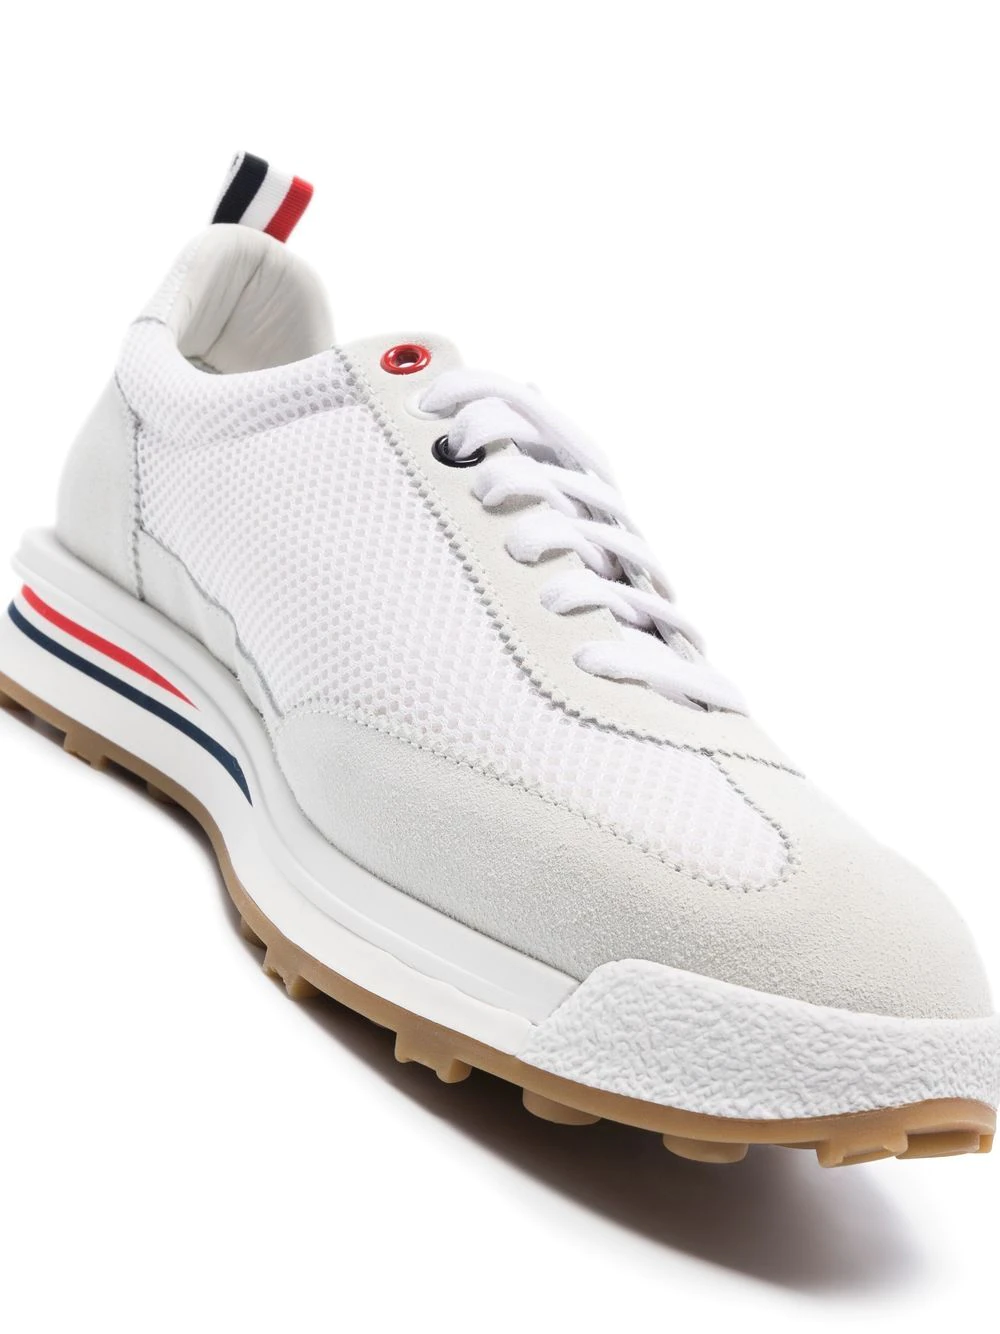       Thom-Browne-Mens-Casual-Sporty-Sneaker-White-2